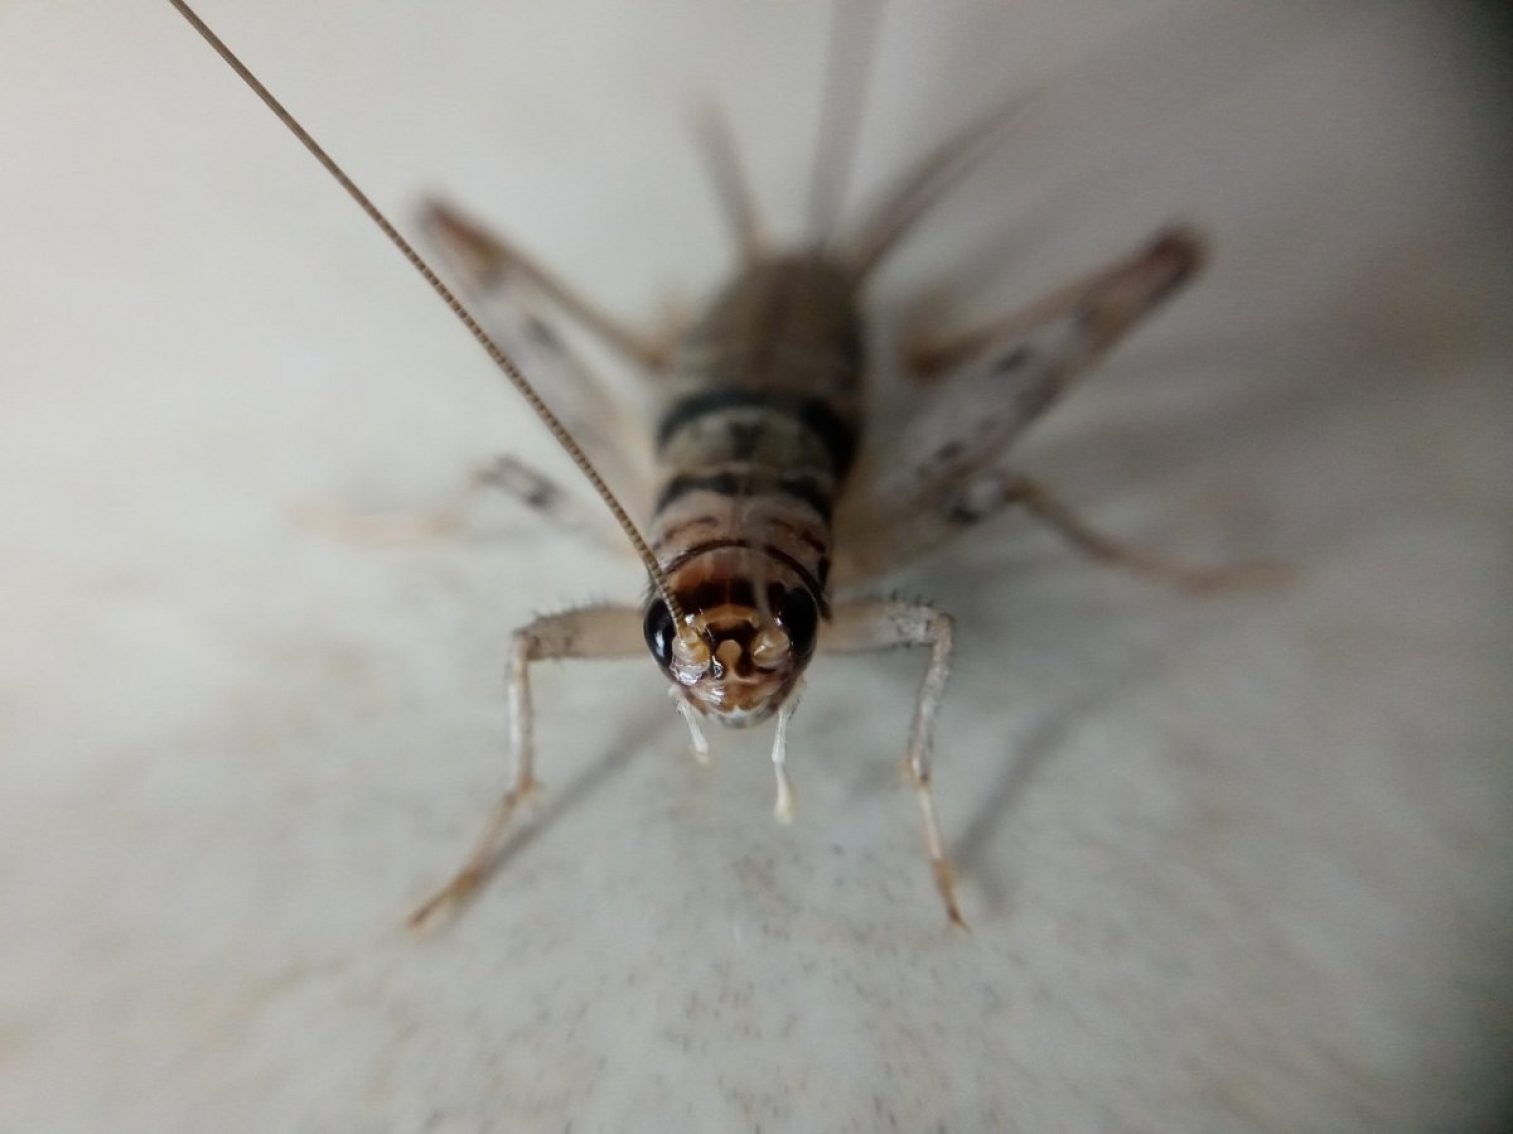 tropical house cricket, cricket, insect